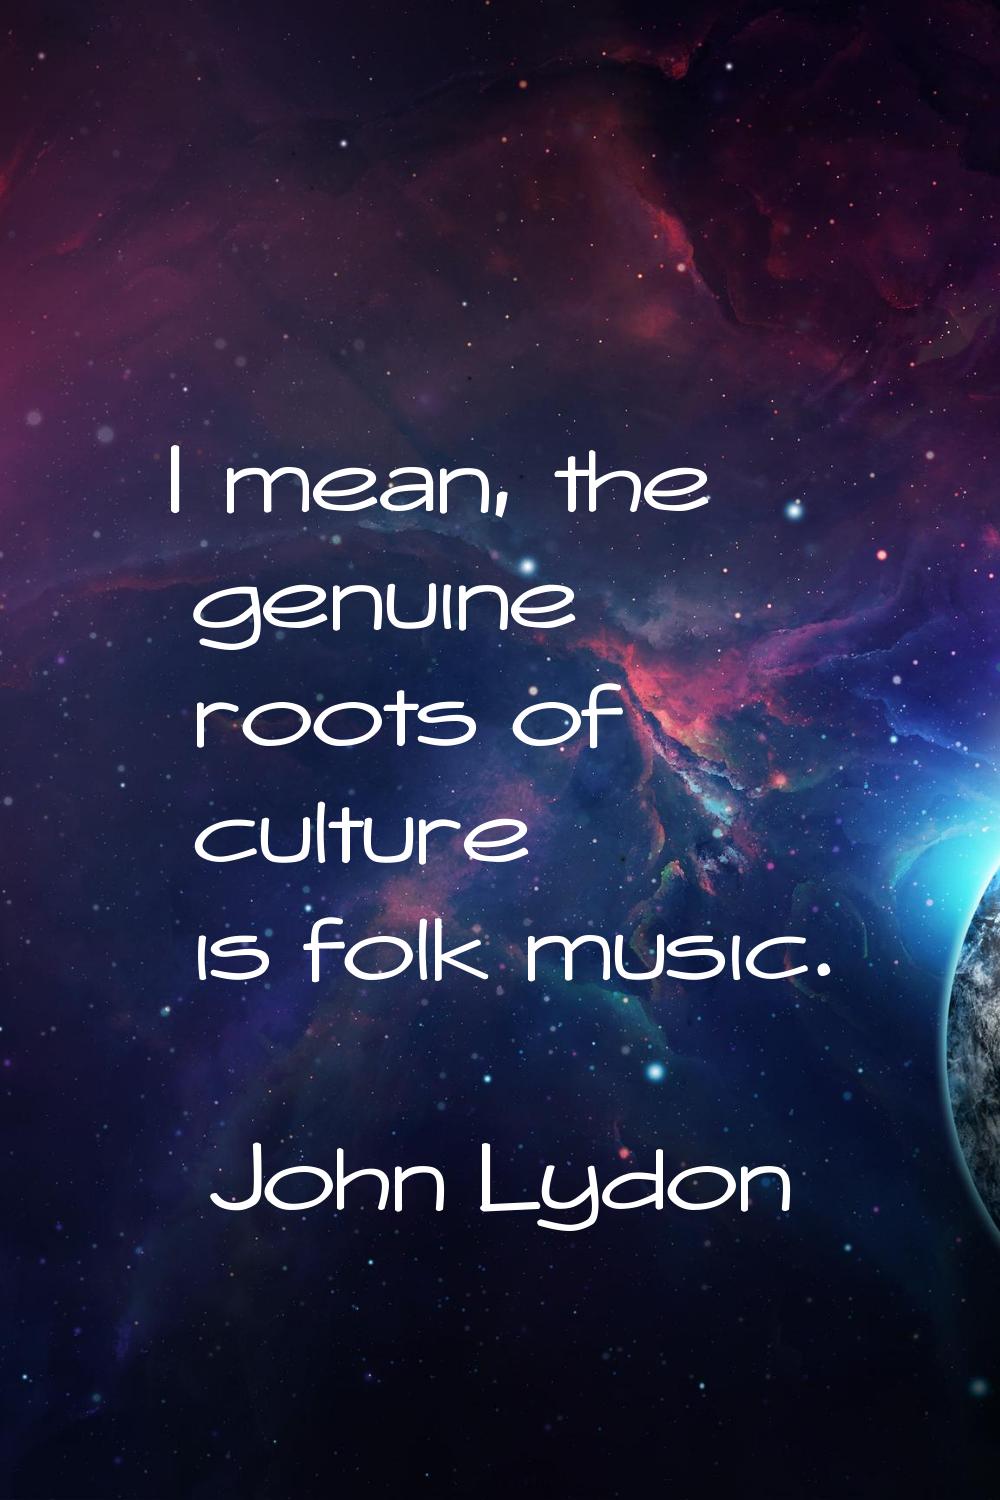 I mean, the genuine roots of culture is folk music.